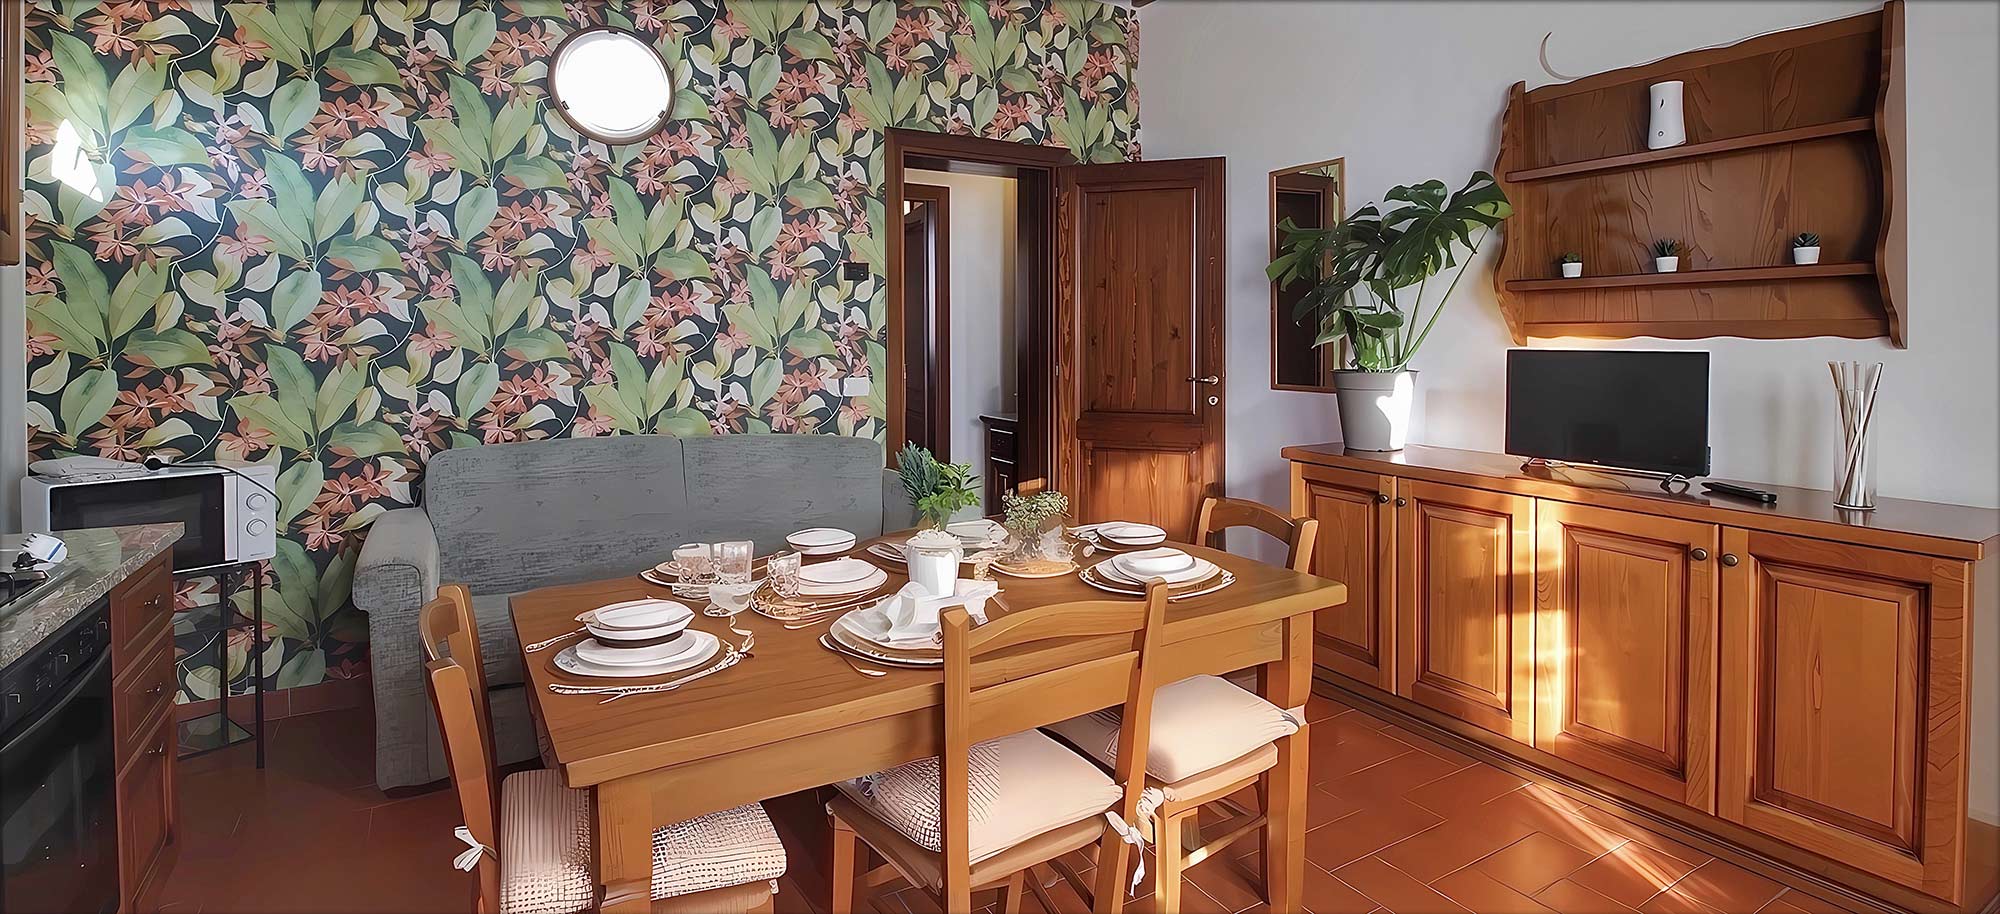 Corte Tommasi - Holiday apartments in Tuscany - 106 - Tuscany apartment with swimming pool